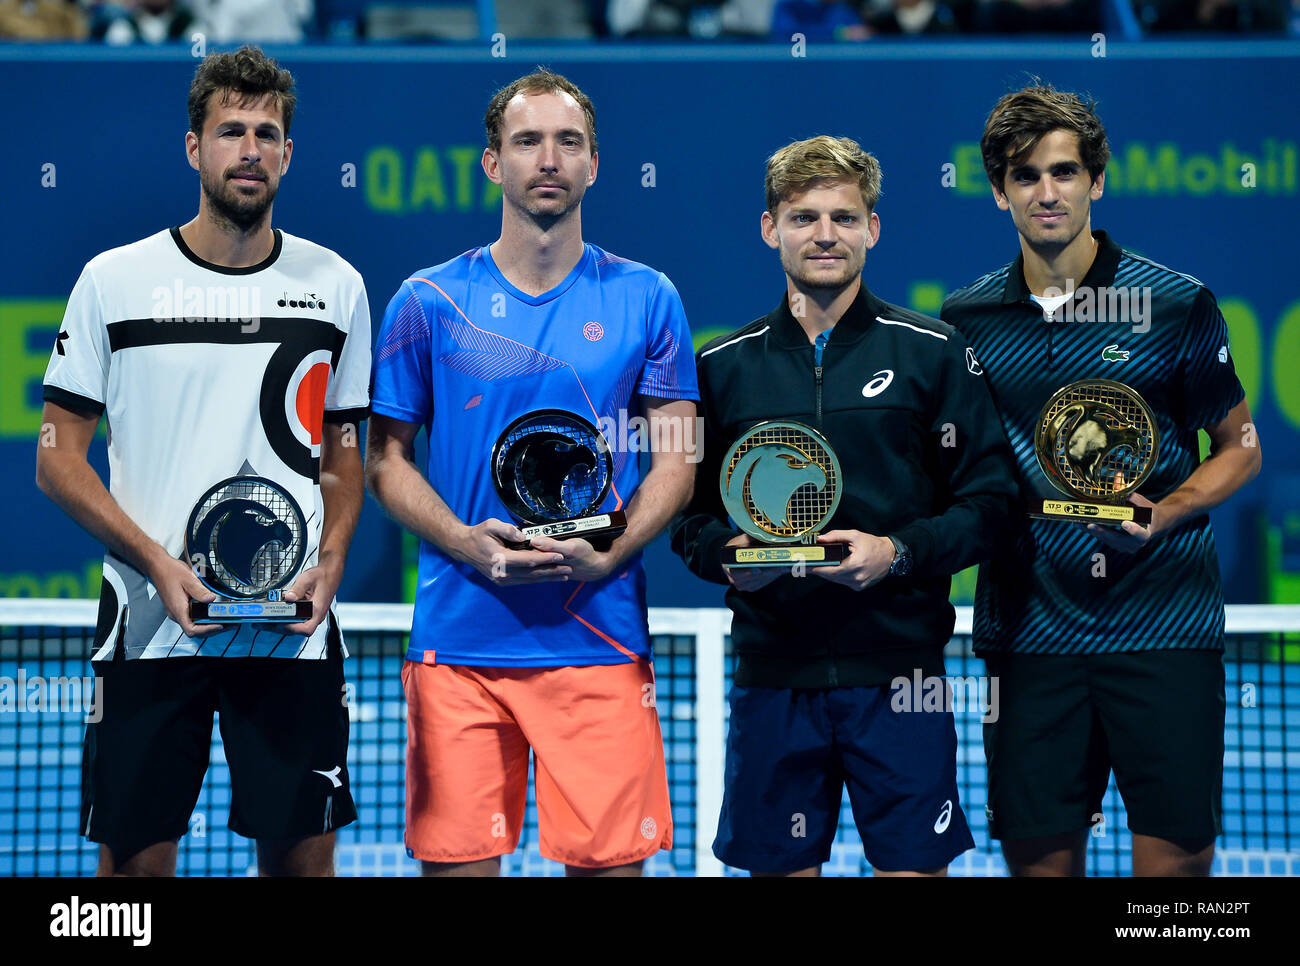 Doha, Qatar. 4th Jan, 2019. (SP)QATAR-DOHA-TENNIS-QATAR Belgium's Davif  Goffin (2nd R), Pierre-Hugues Herbert (R) of France, Robin Haase (L) and  Matwe Middelkoop (2nd L) of the Netherlands pose with their trophies after